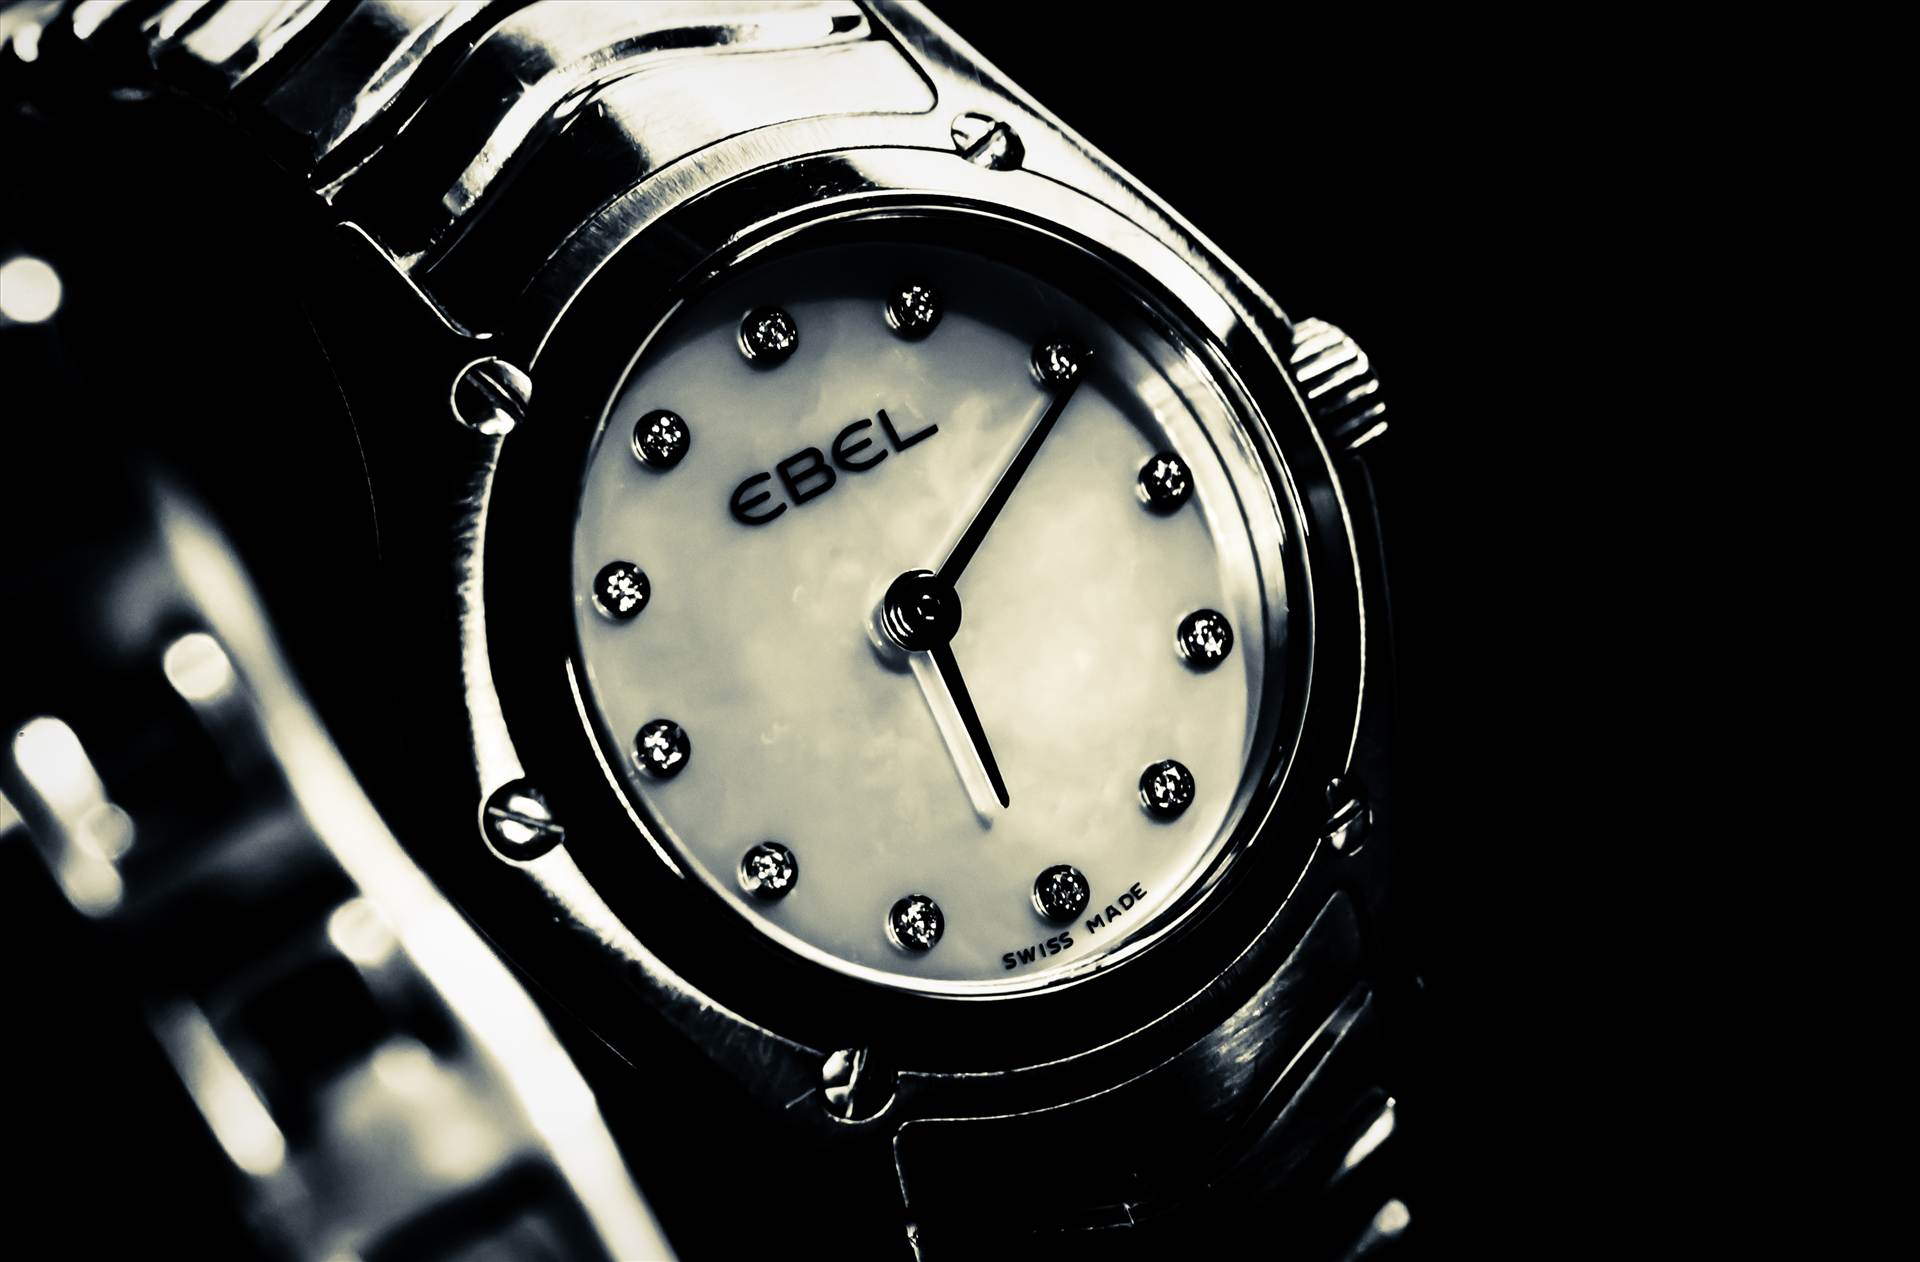 Watch.jpg  by WPC-187